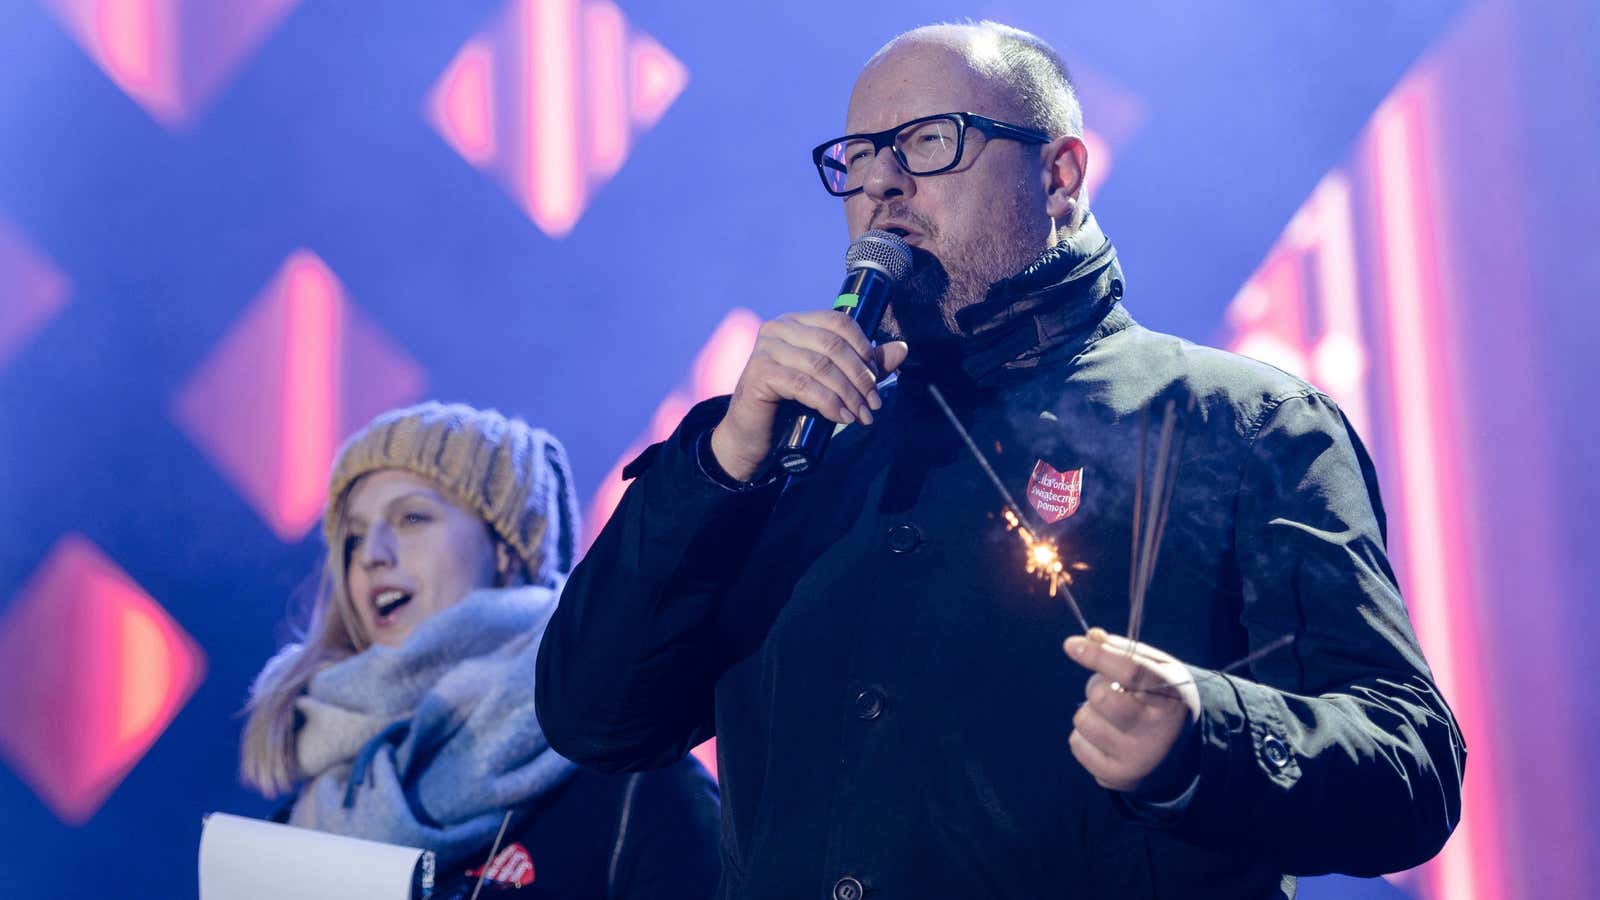 Adamowicz shortly before the attack.